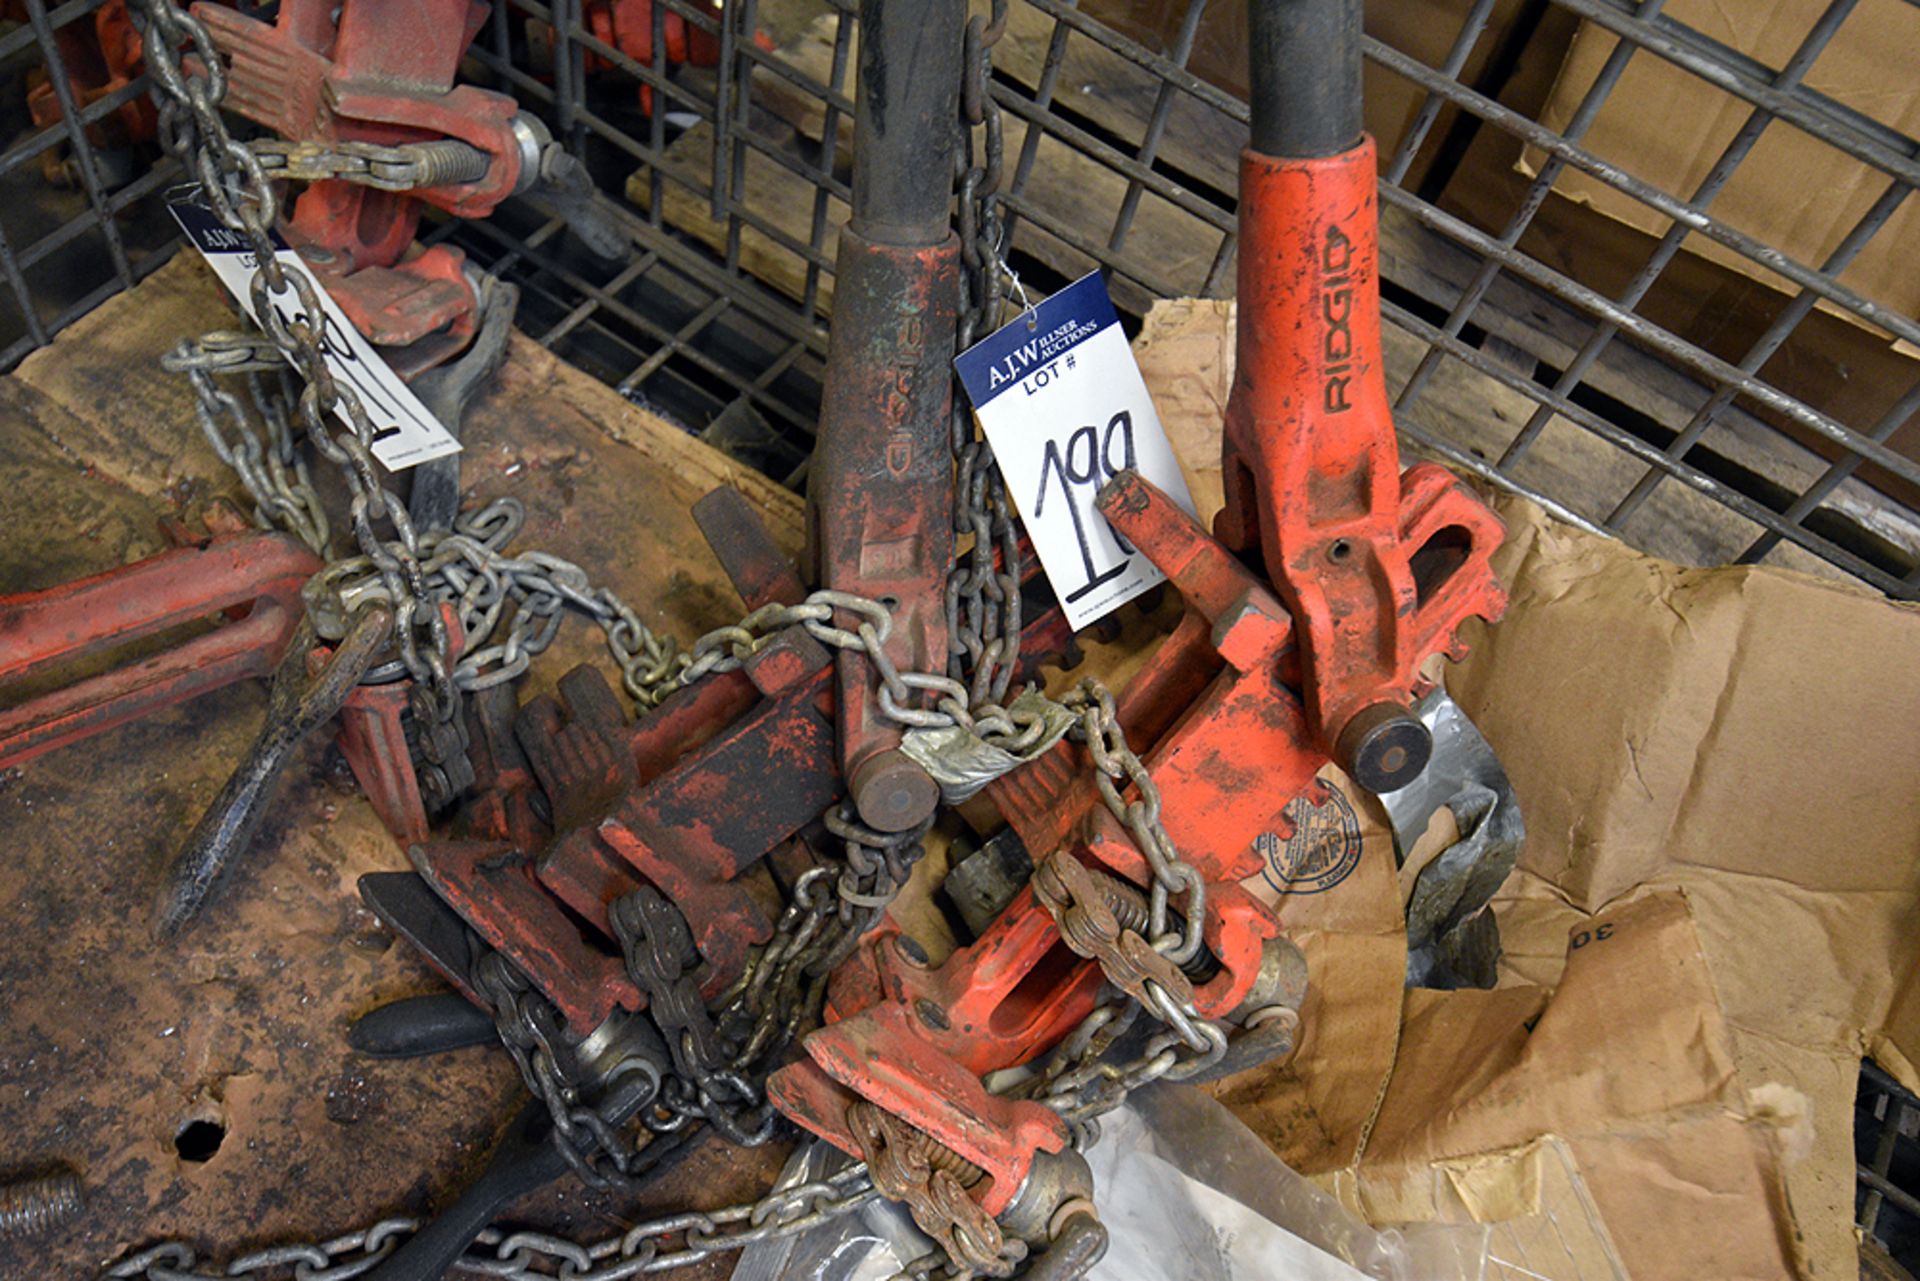 RIGID CHAIN VISE SOIL PIPE WRENCH - Image 2 of 3